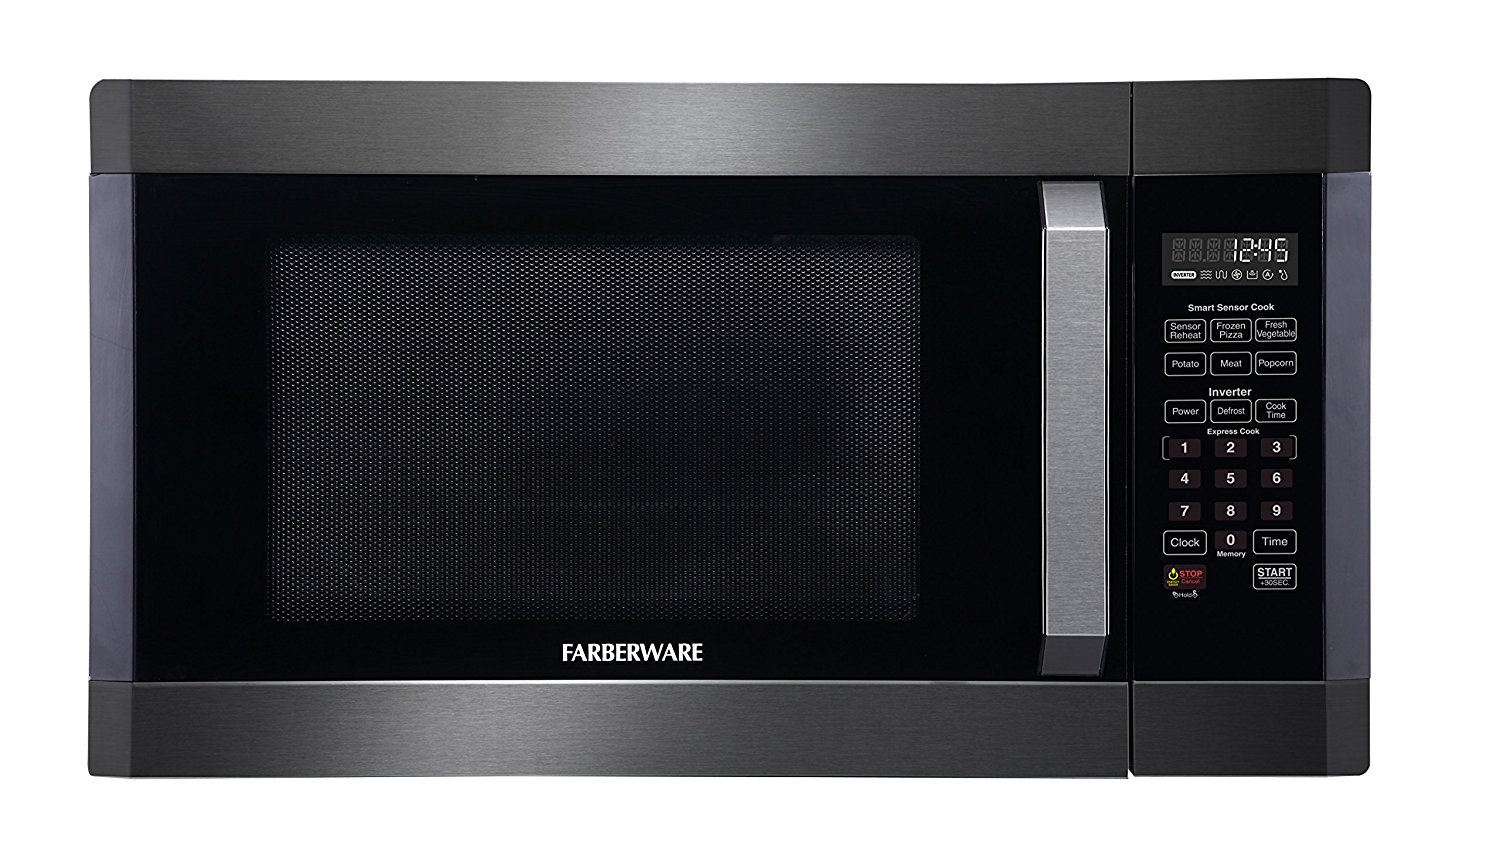 Farberware Black FMO16AHTBSE 1.6 Cubic Foot 1300-Watt Microwave Oven with Smart Sensor Cooking and Inverter Precision Cooking Technology, Stainless Steel